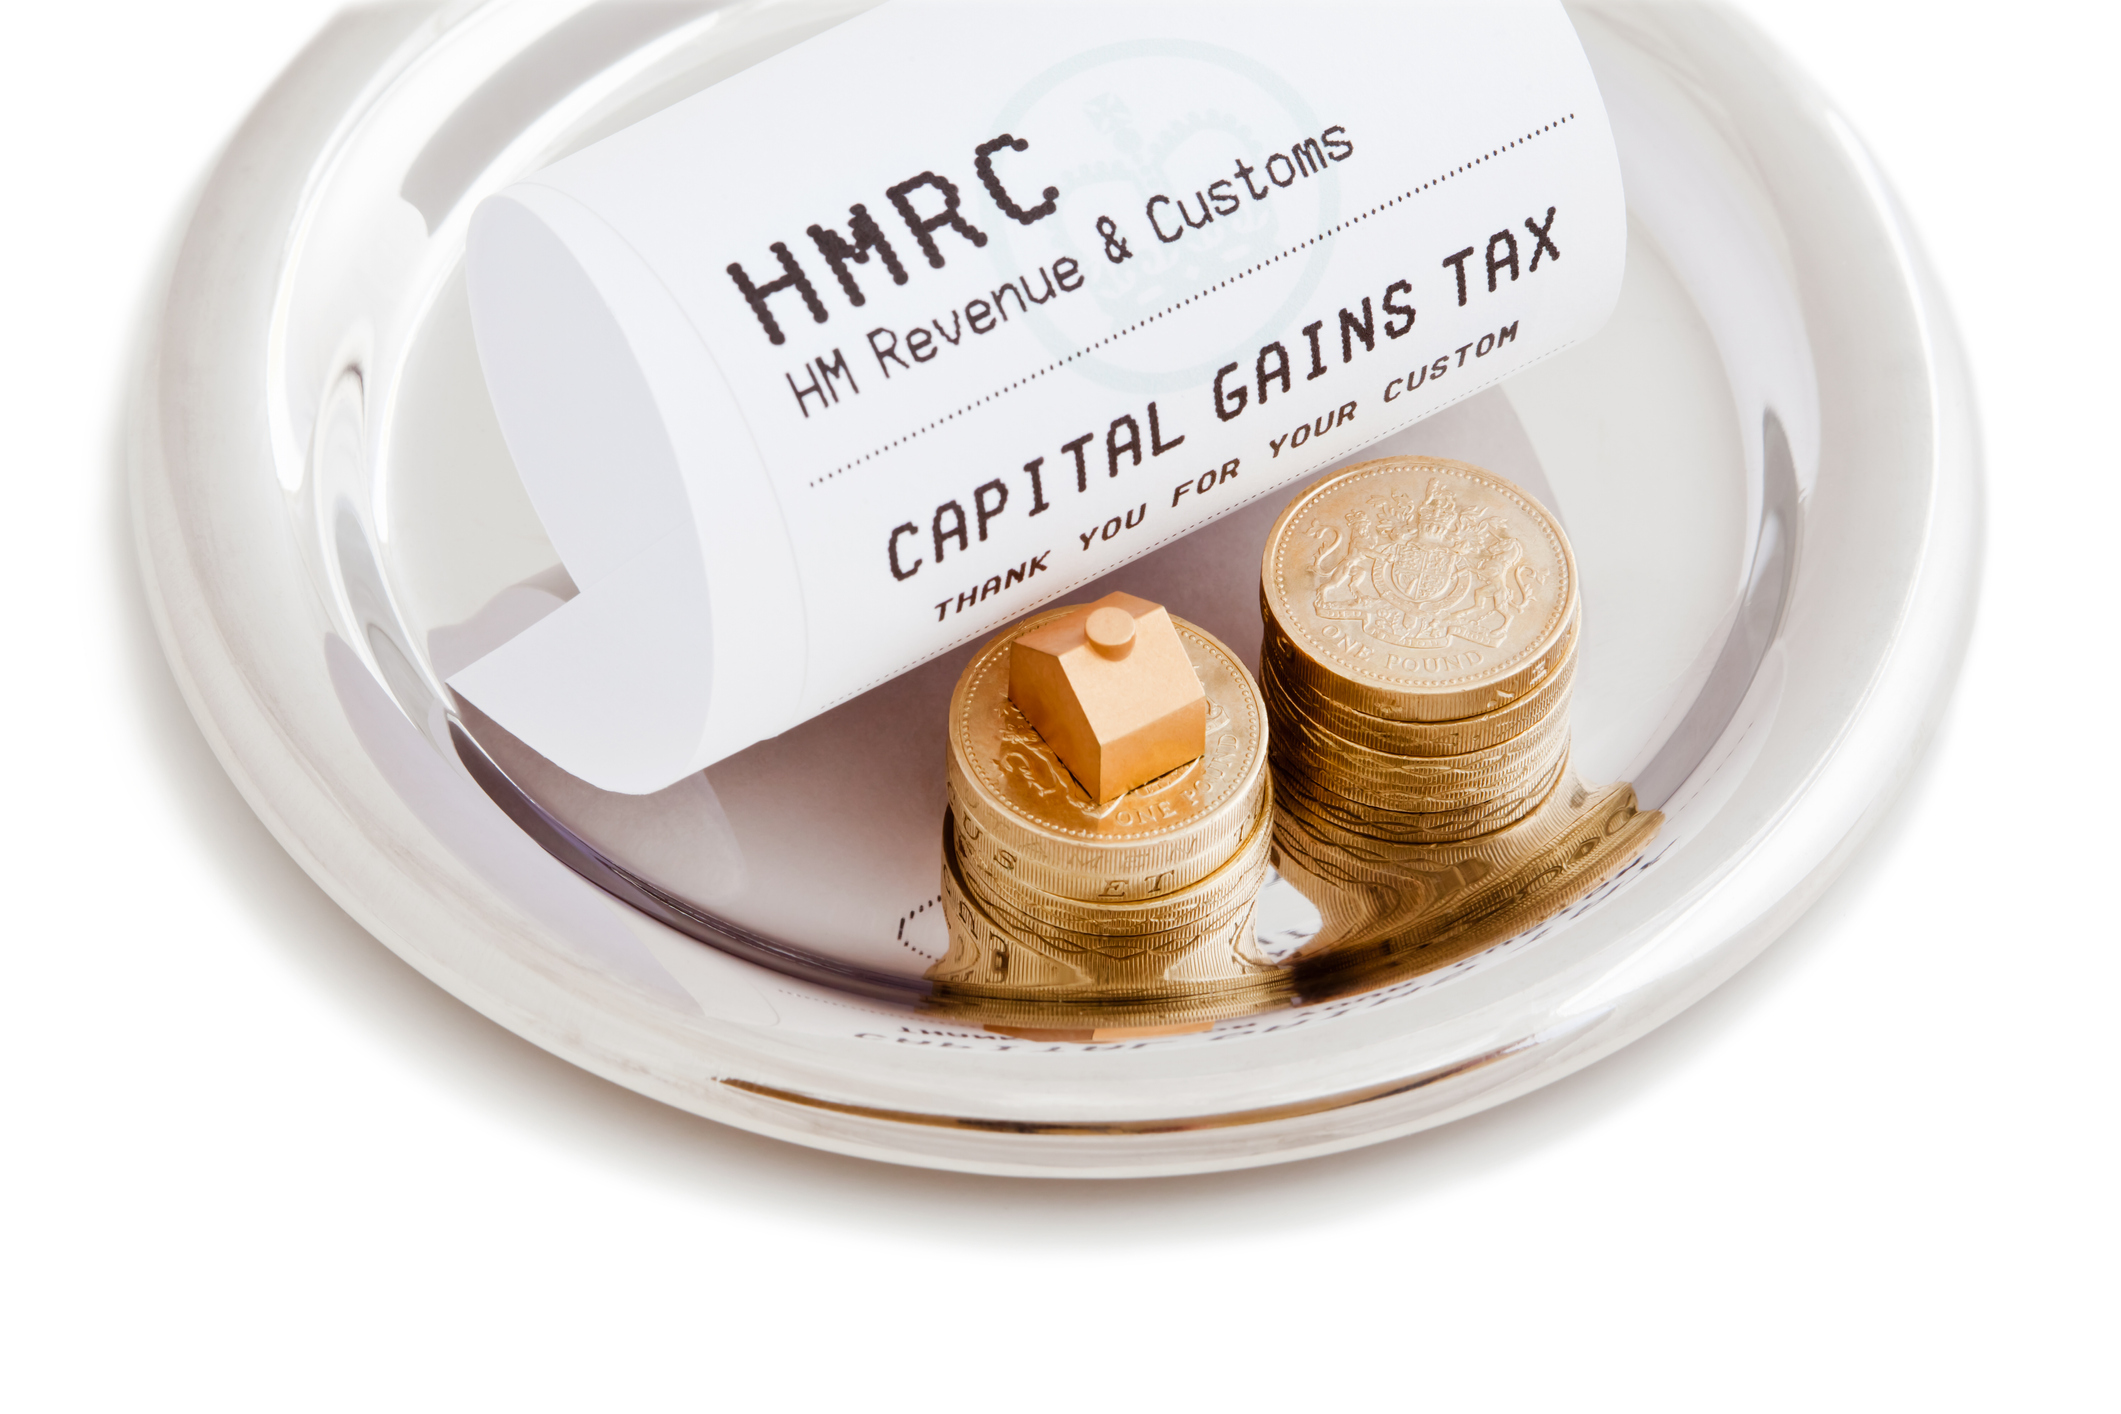 Making use of the Capital Gains Tax allowance